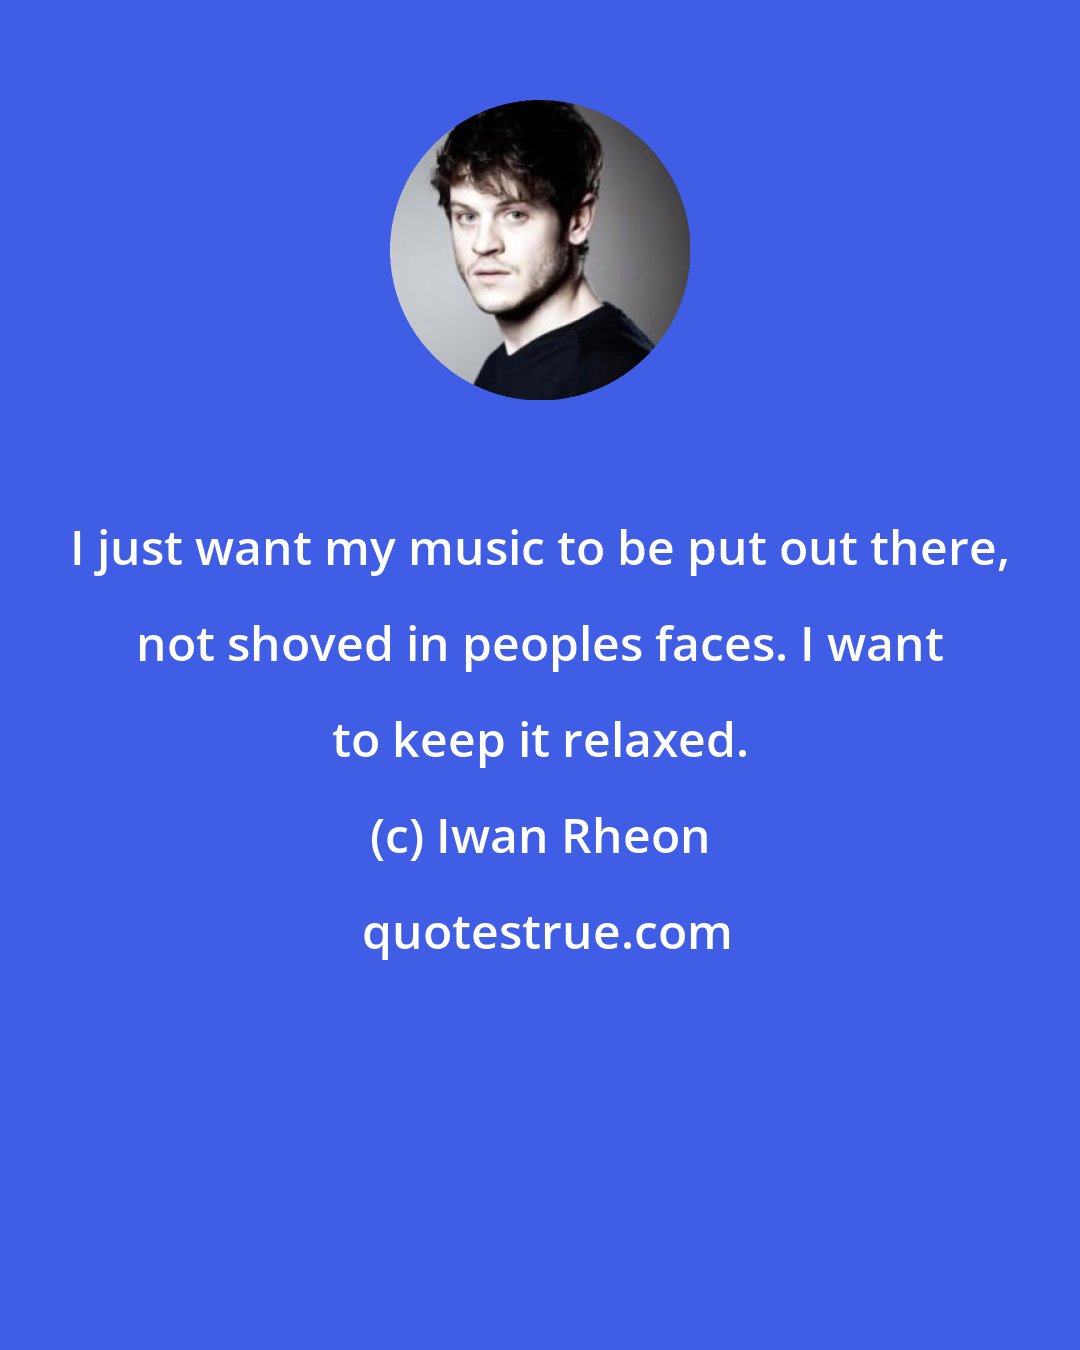 Iwan Rheon: I just want my music to be put out there, not shoved in peoples faces. I want to keep it relaxed.